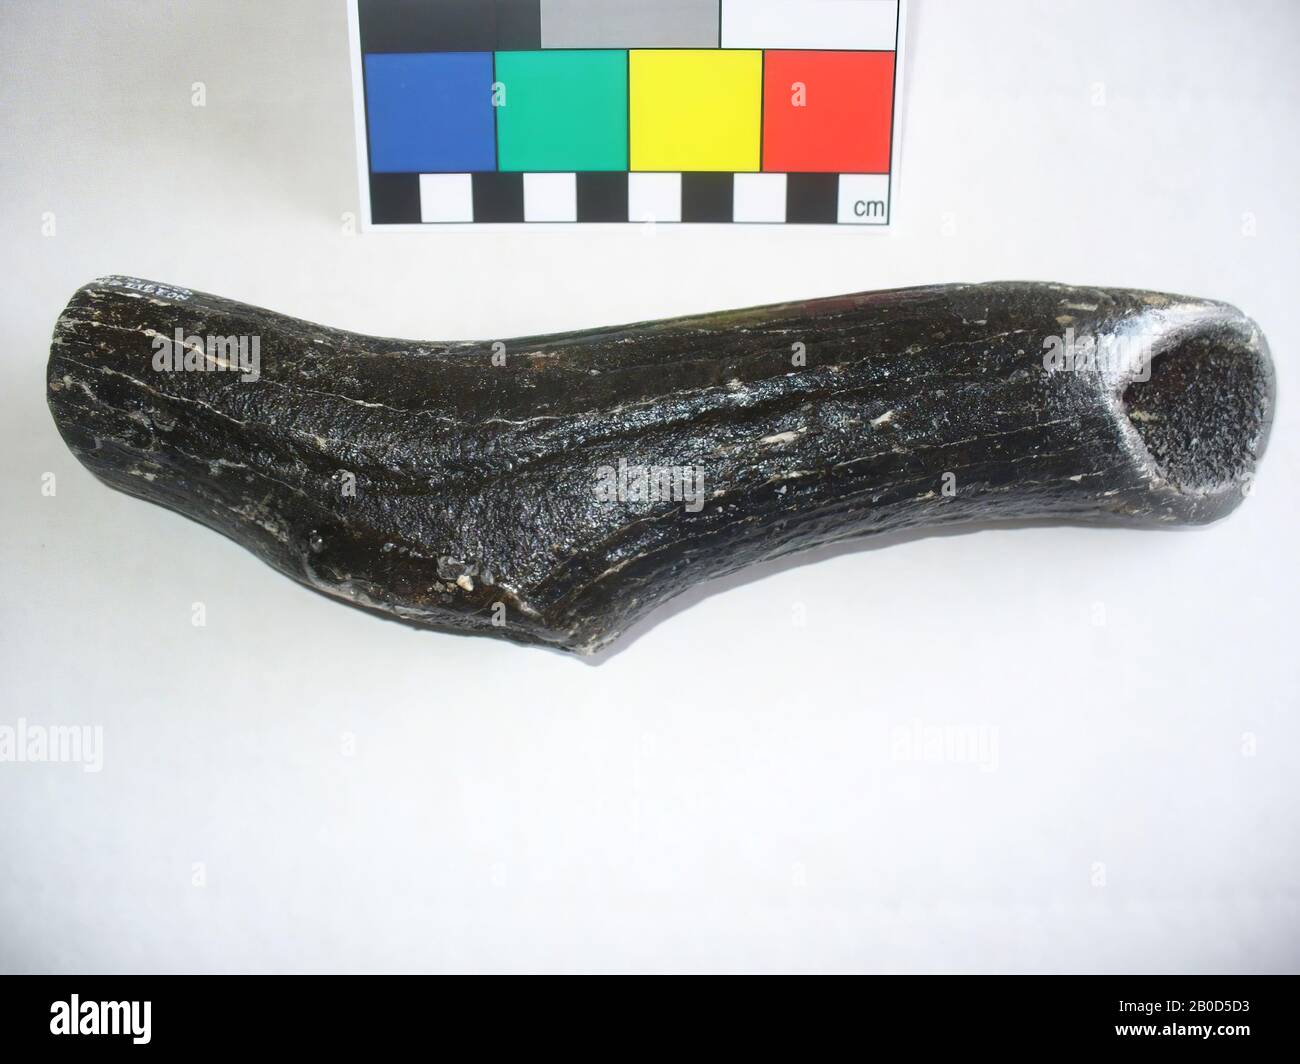 tool, organic, antlers, L: 21.5 cm, W: 5.7 cm, D: 4.2 cm, G: 362 gr., Mesolithic 8000-4000 BC, Netherlands, South Holland, Maasvlakte, North Sea, west of the Brown Bank Stock Photo